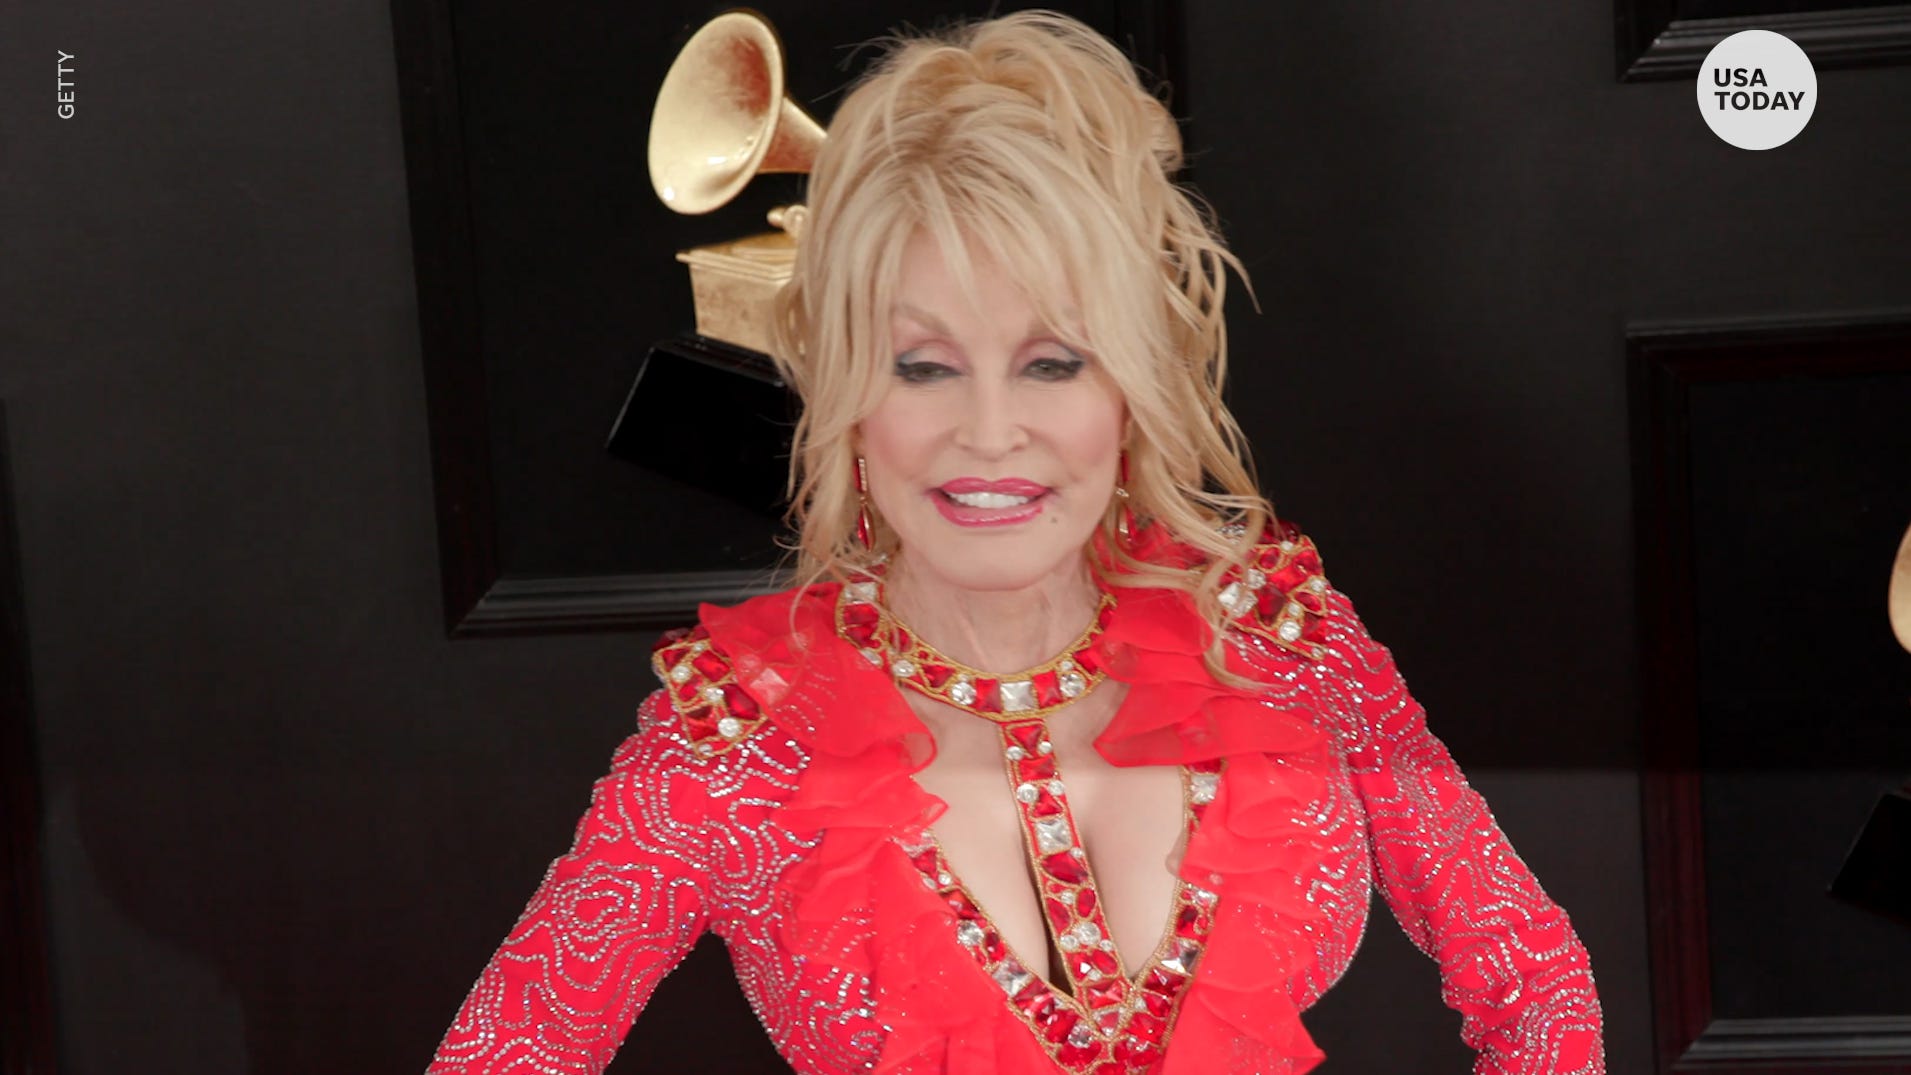 Dolly Parton Country Star Wants To Be Playboy S Cover When She S 75